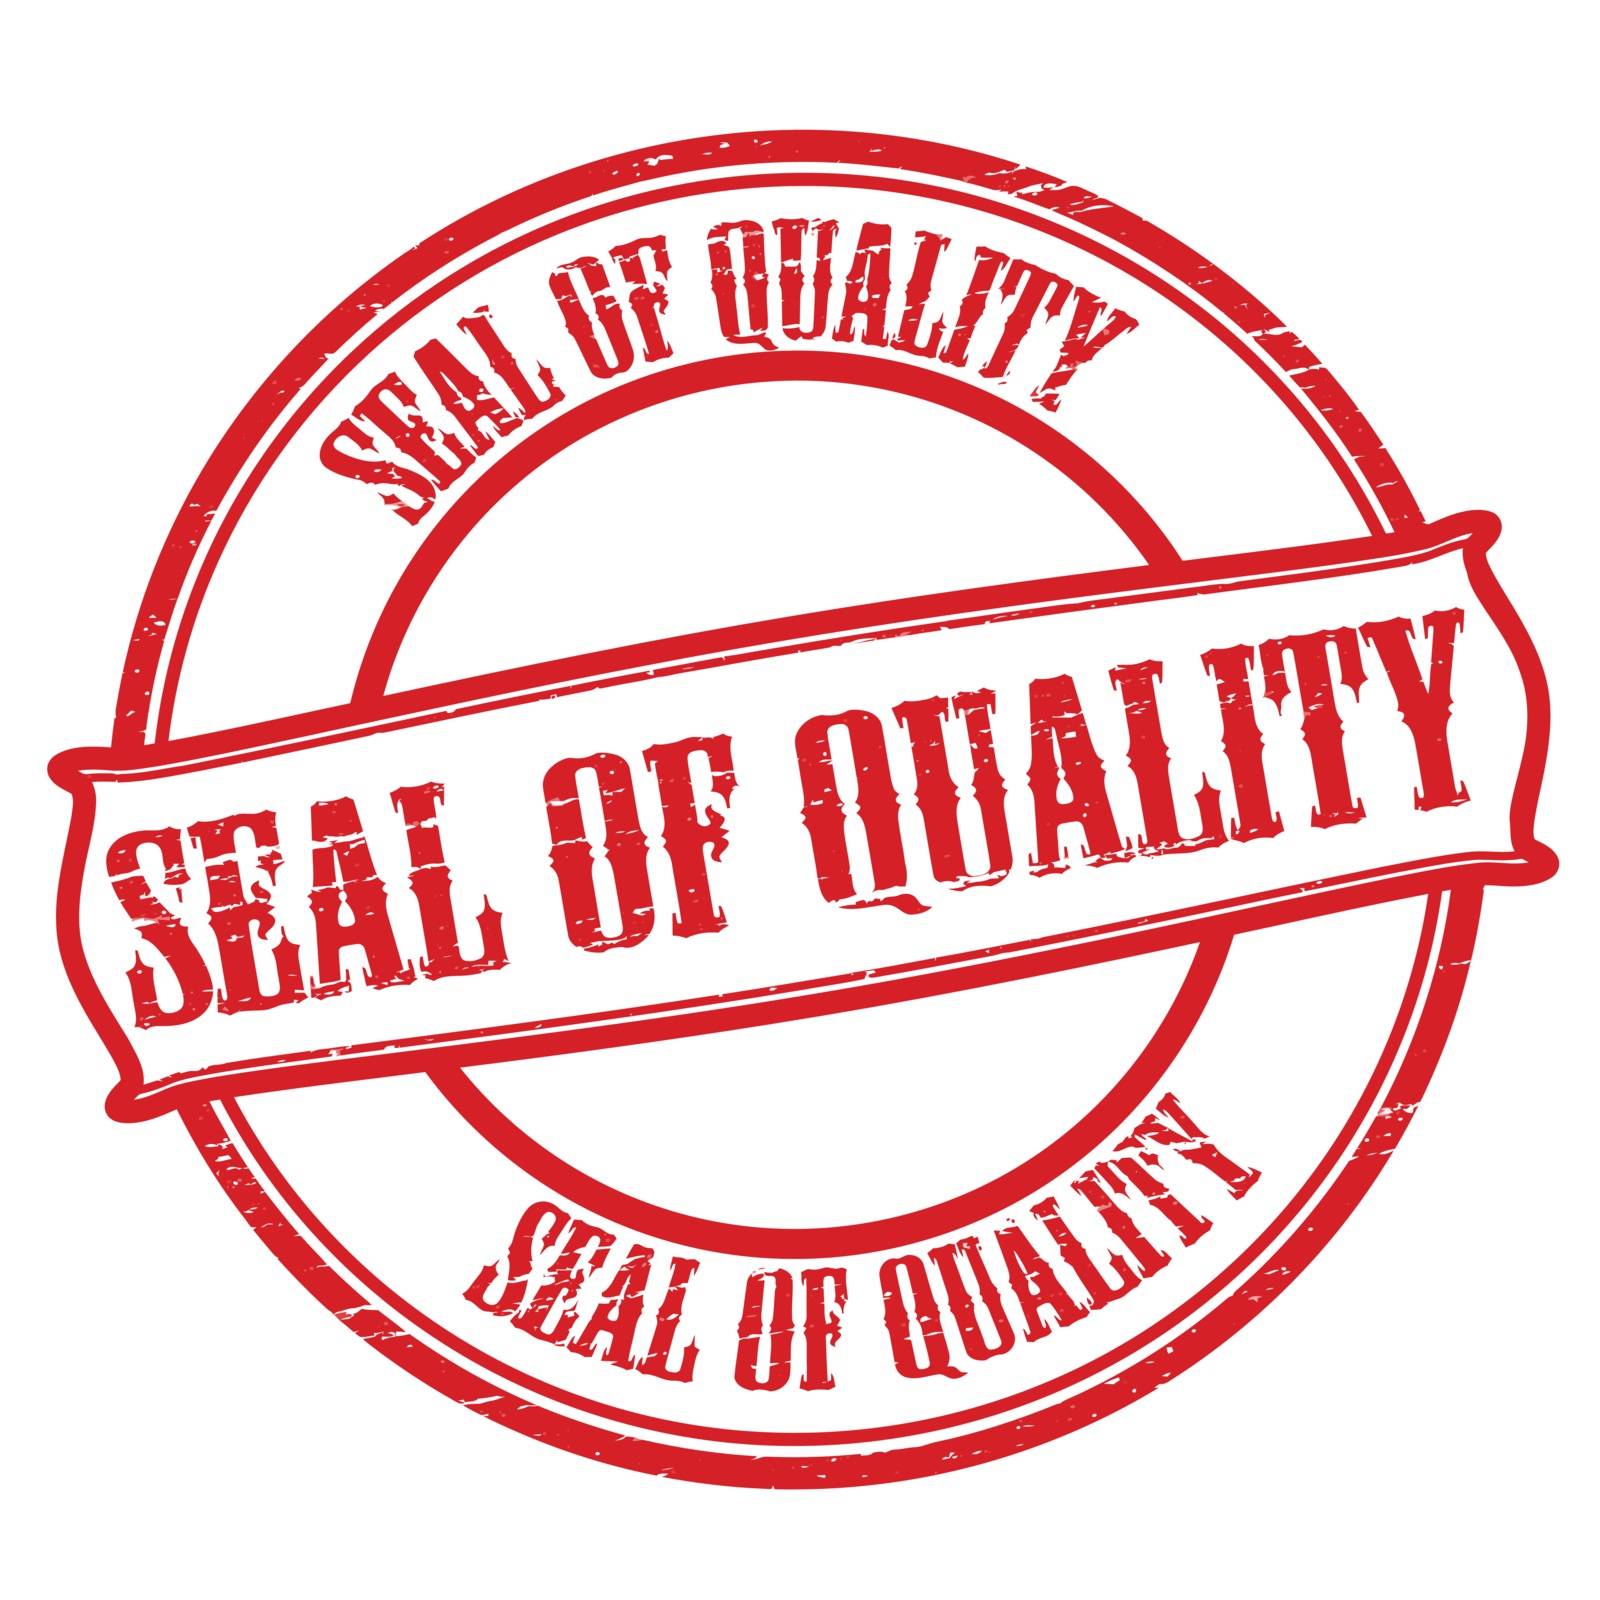 Rubber stamp with text seal of quality inside, vector illustration